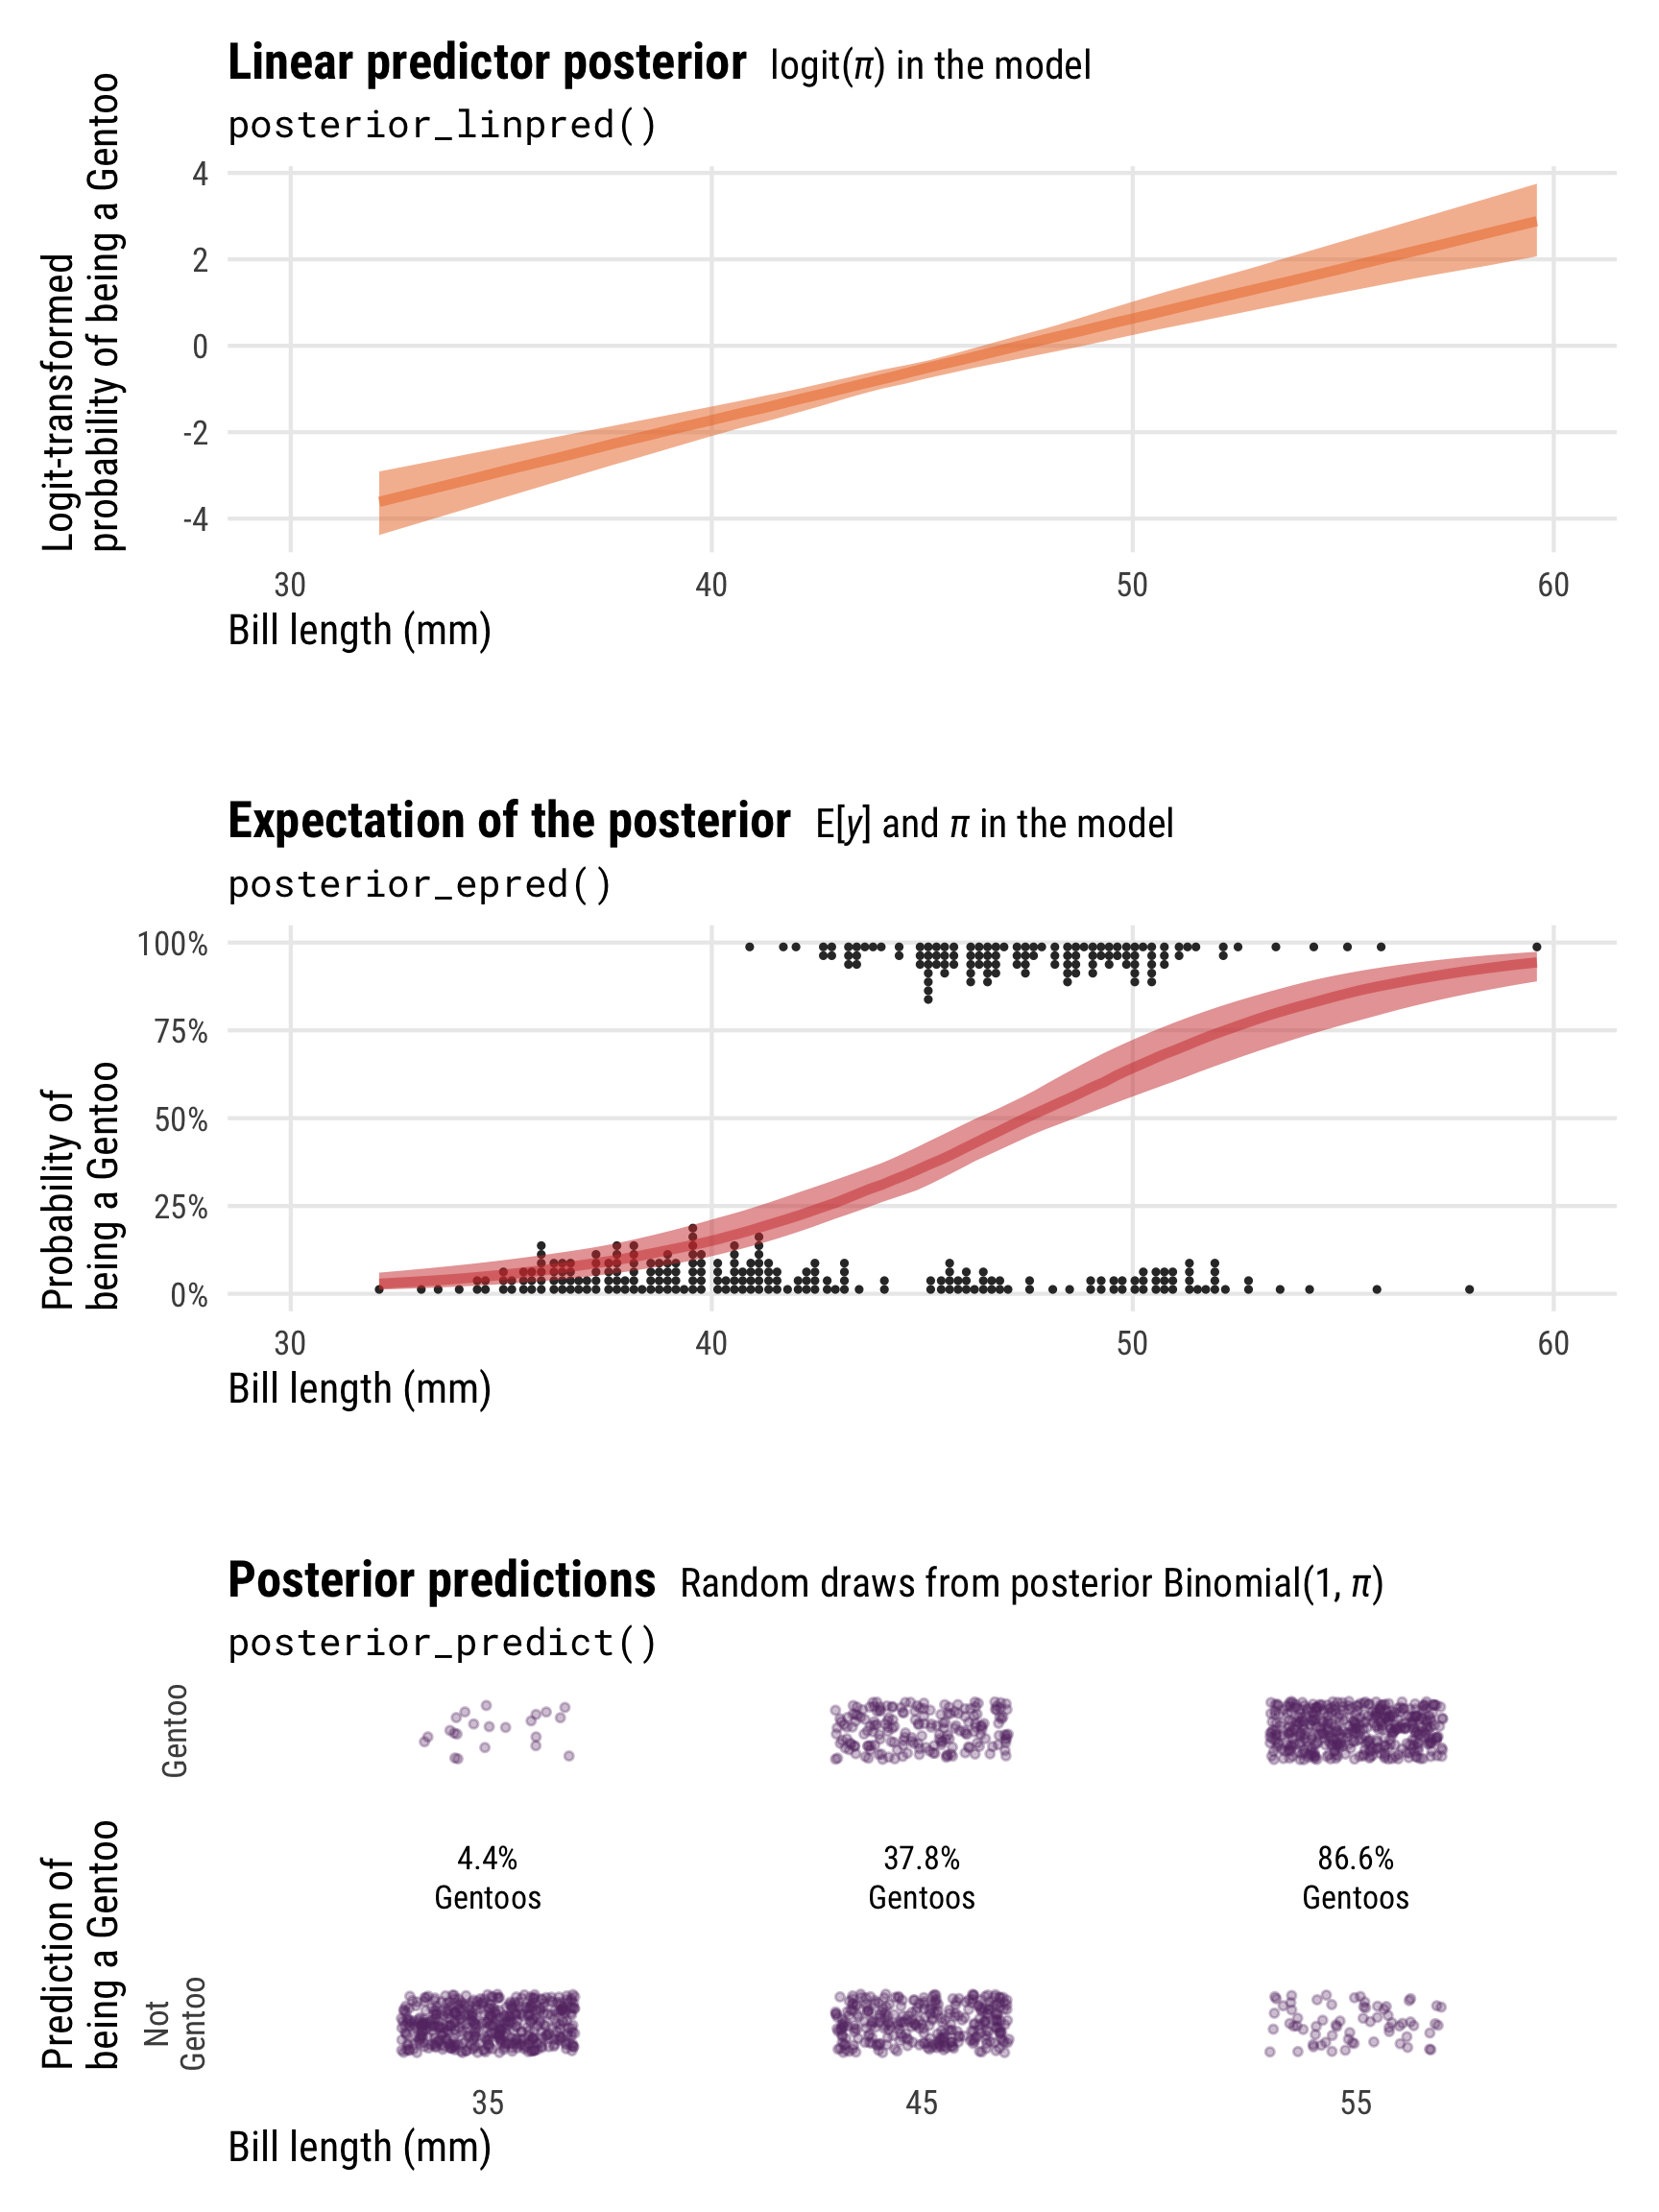 Visualizing the differences between Bayesian posterior predictions, linear predictions, and the expectation of posterior predictions